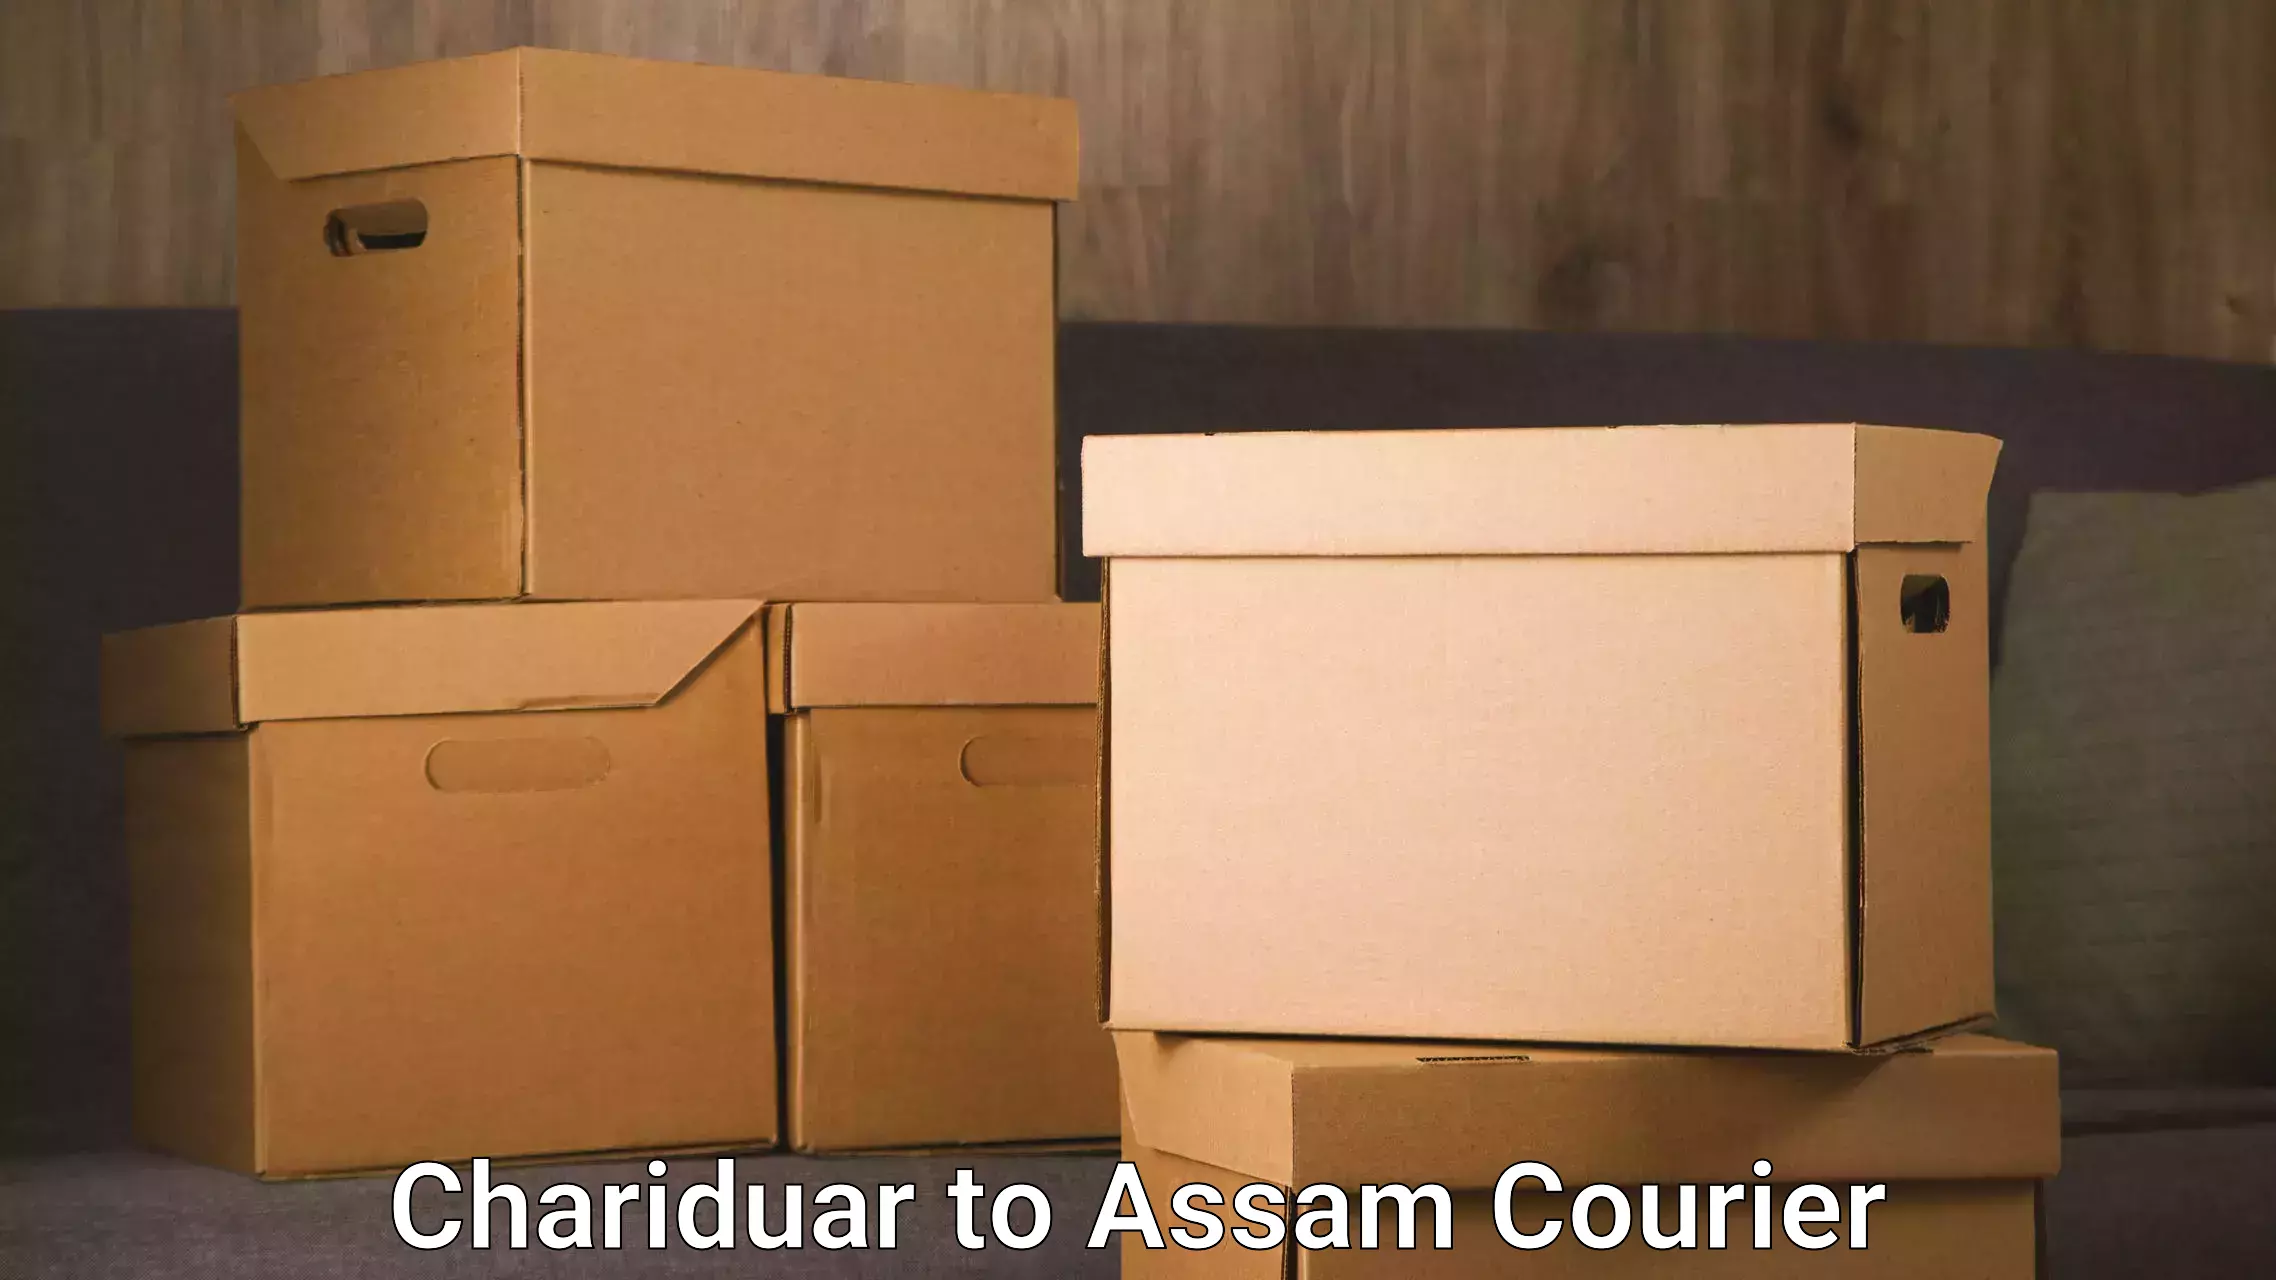 Cargo delivery service Chariduar to Lala Assam